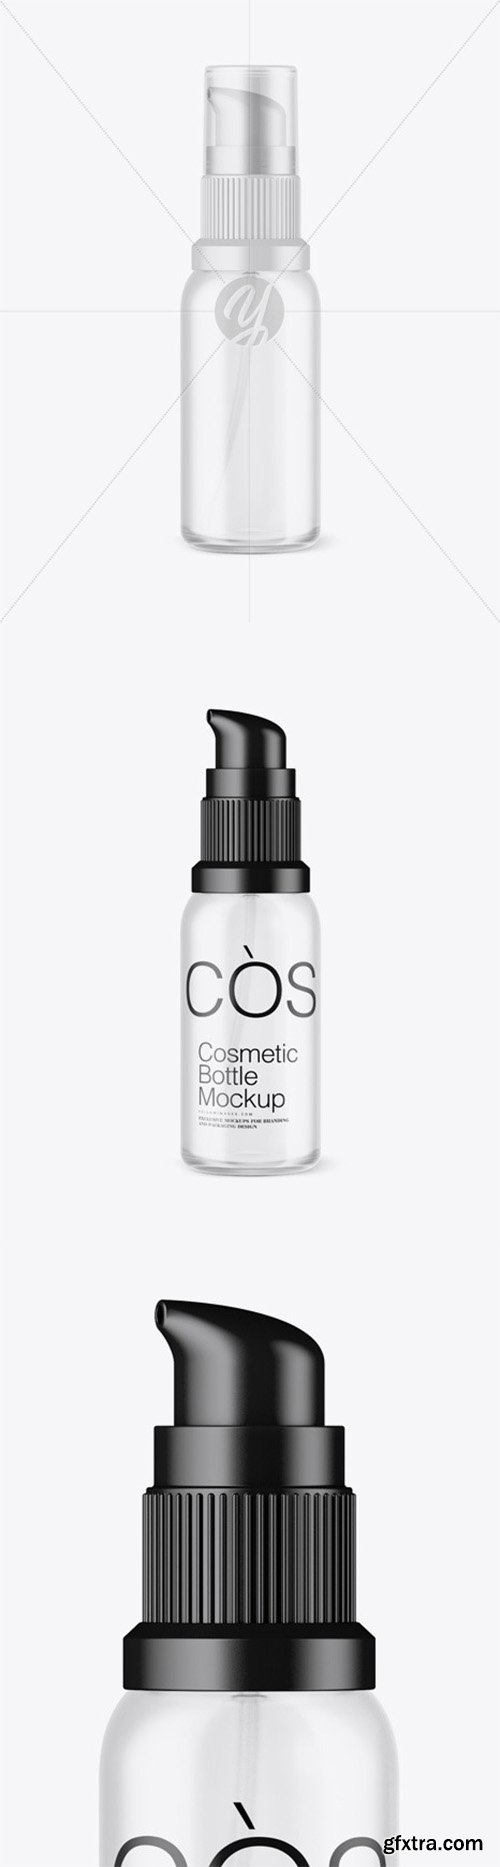 Frosted Cosmetic Bottle Mockup 52352